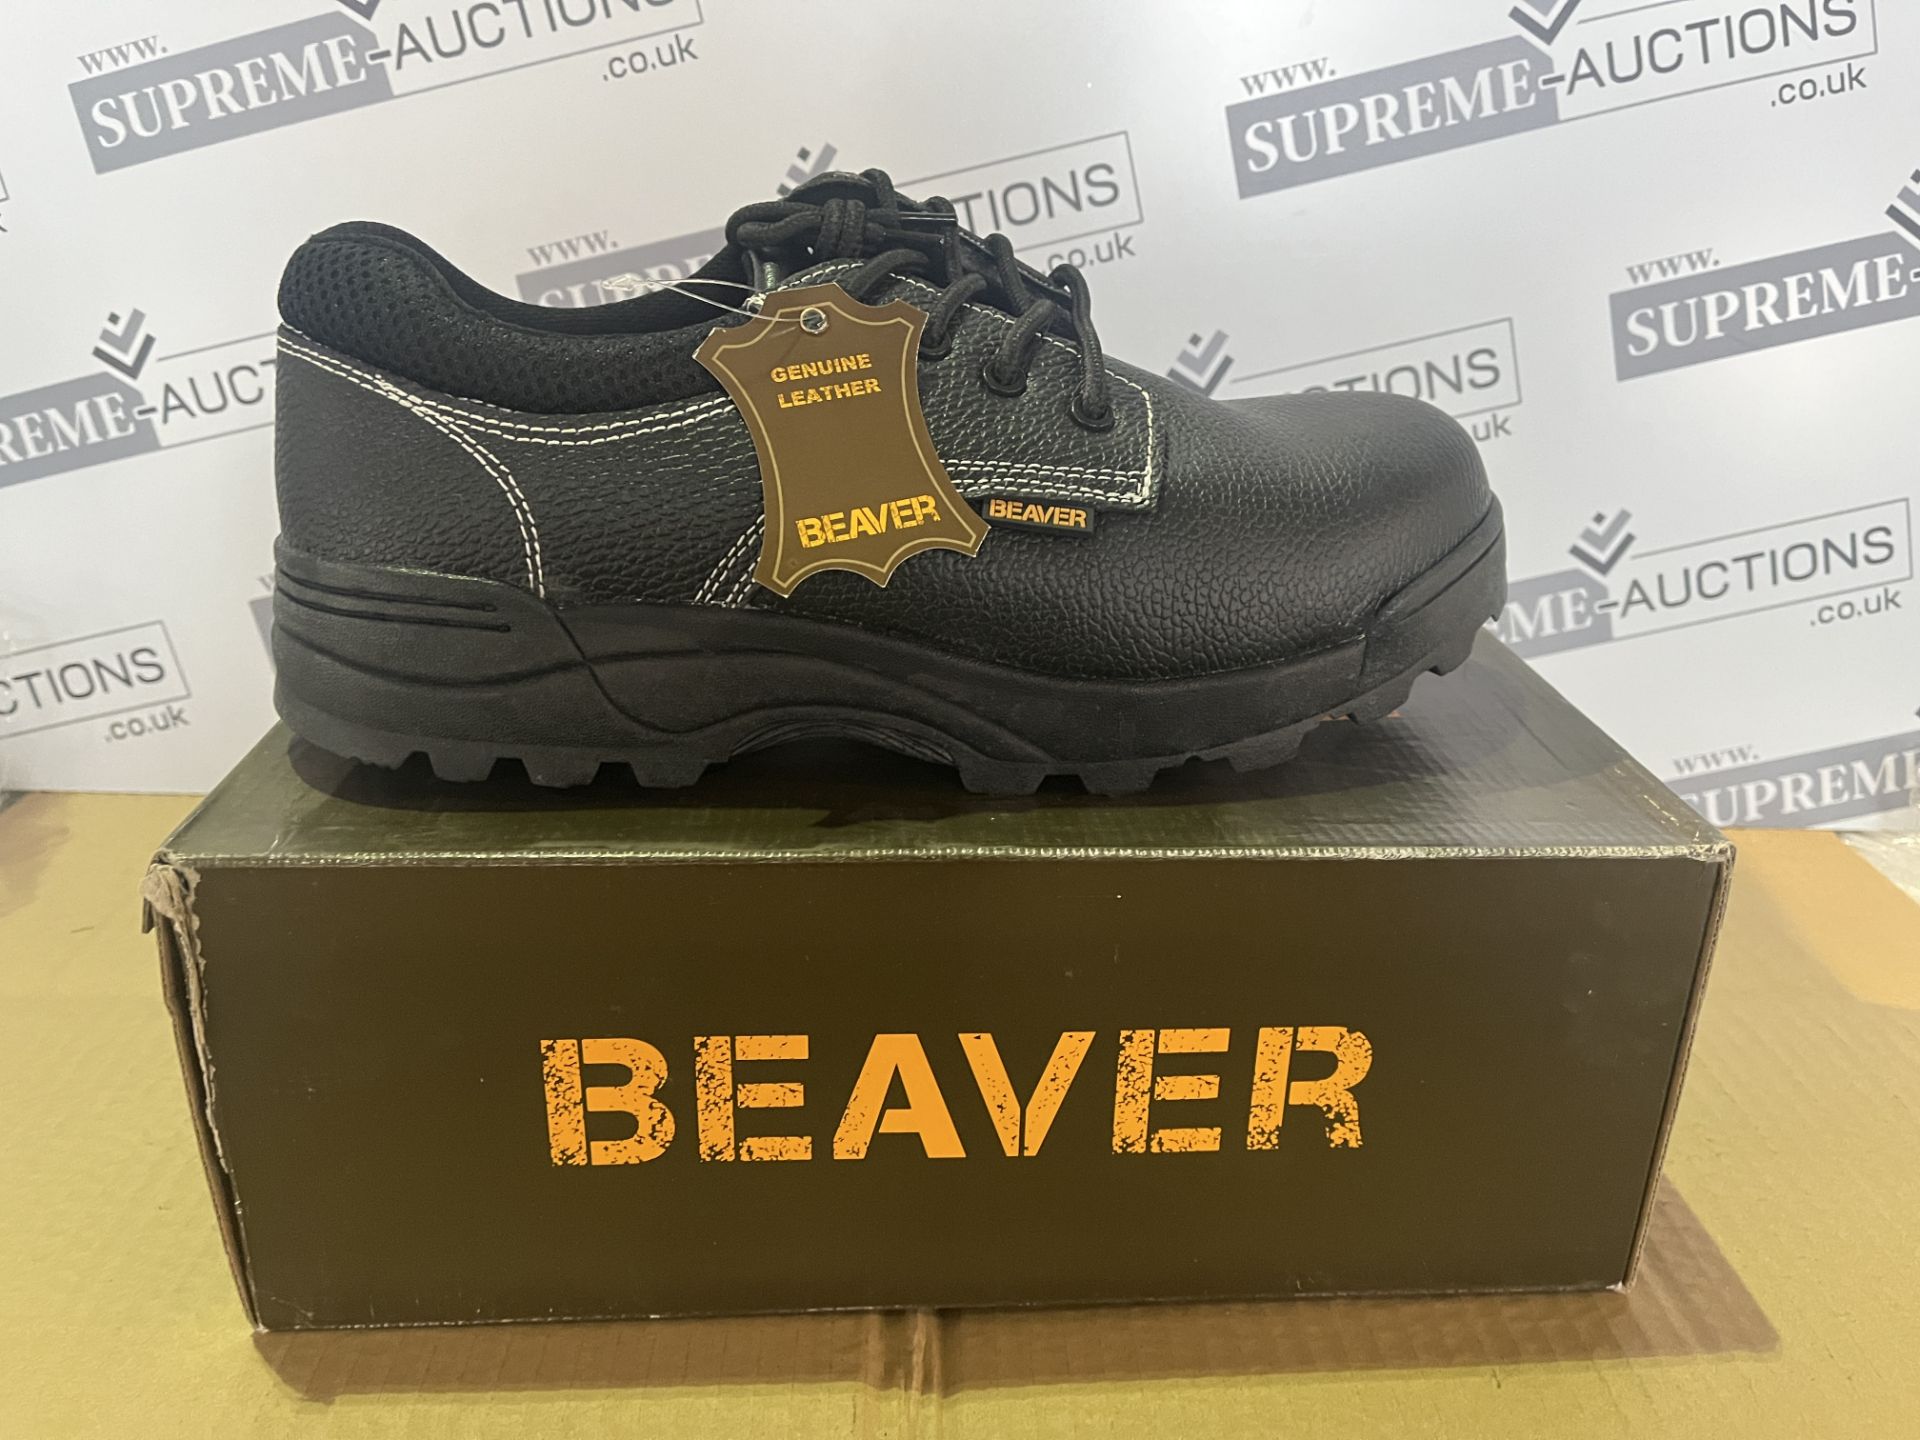 6 X BRAND NEW PAIRS OF BEAVER PROFESSIONAL WORK BOOTS SIZE 8 R15-9